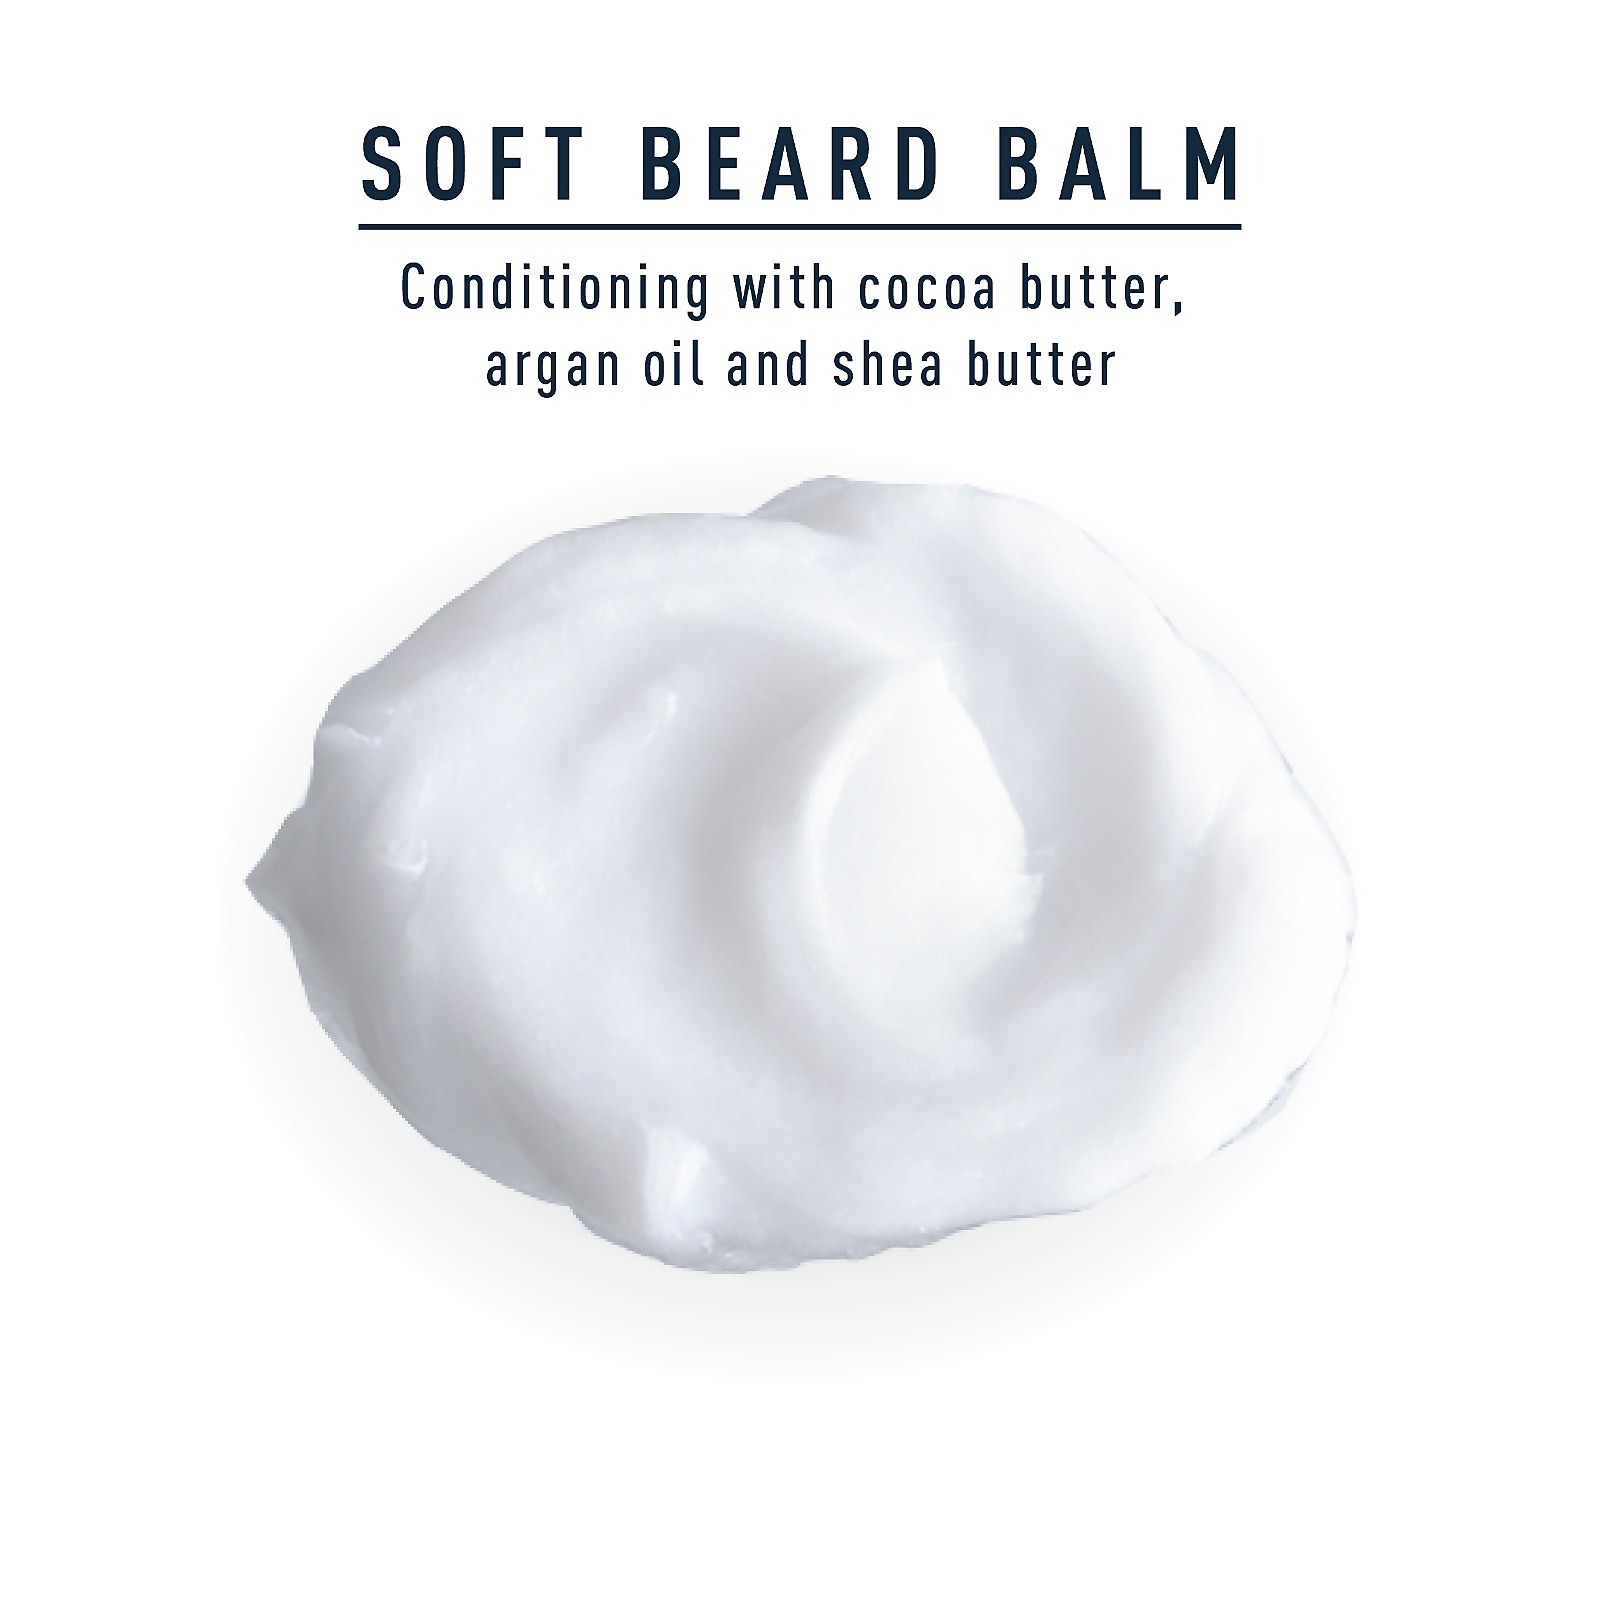 SOFT BEARD BALM Conditioning with cocoa butter,
                                  argan oil and shea butter